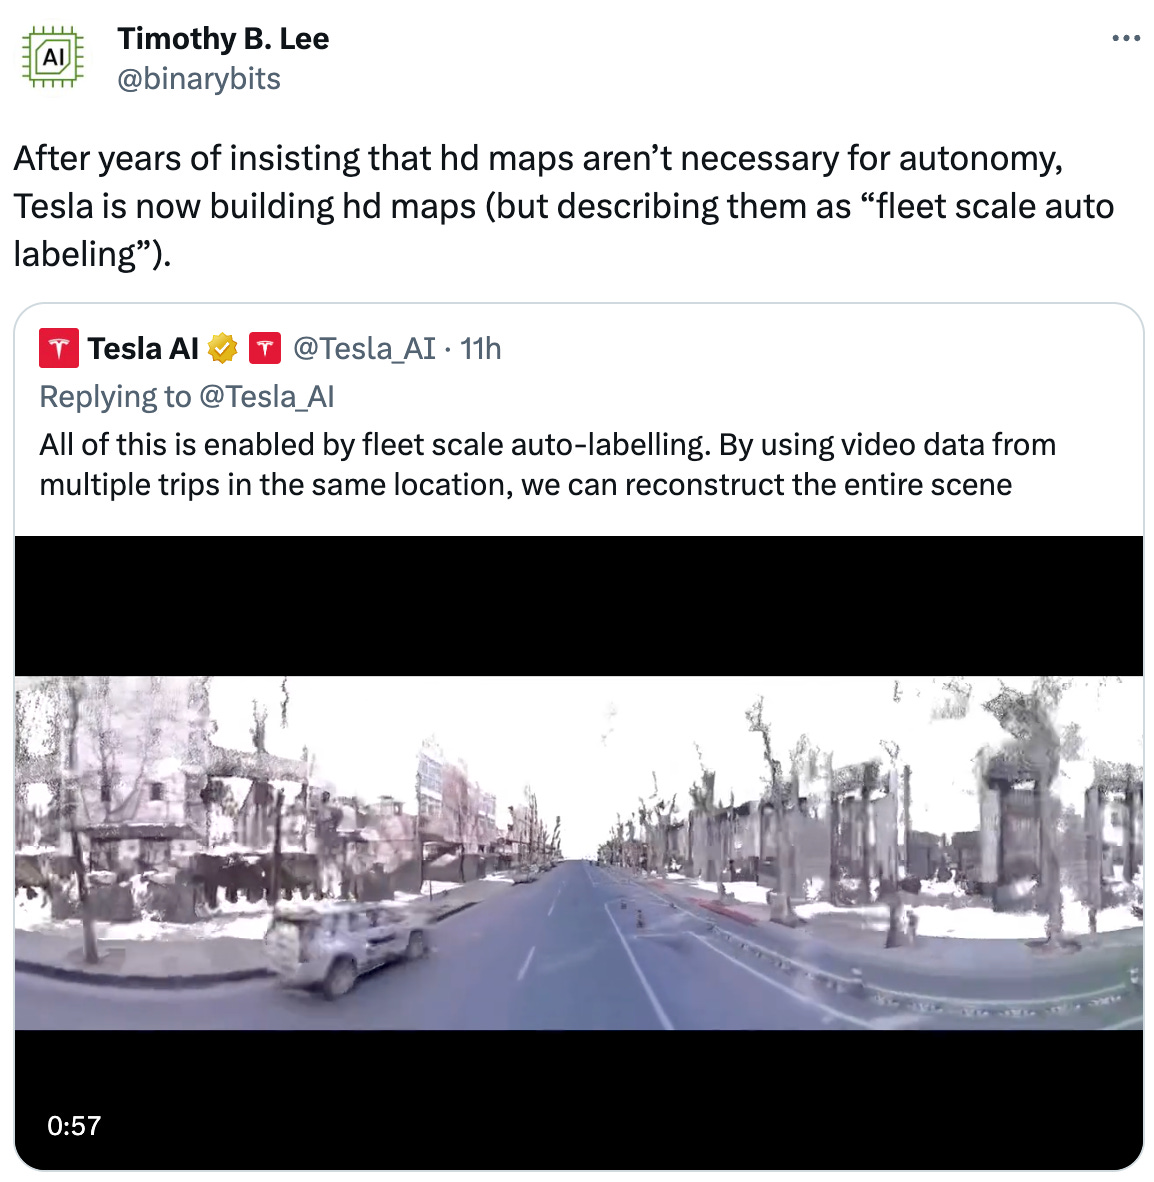  Timothy B. Lee @binarybits After years of insisting that hd maps aren’t necessary for autonomy, Tesla is now building hd maps (but describing them as “fleet scale auto labeling”). Quote Tweet Tesla AI  @Tesla_AI · 11h Replying to @Tesla_AI All of this is enabled by fleet scale auto-labelling. By using video data from multiple trips in the same location, we can reconstruct the entire scene